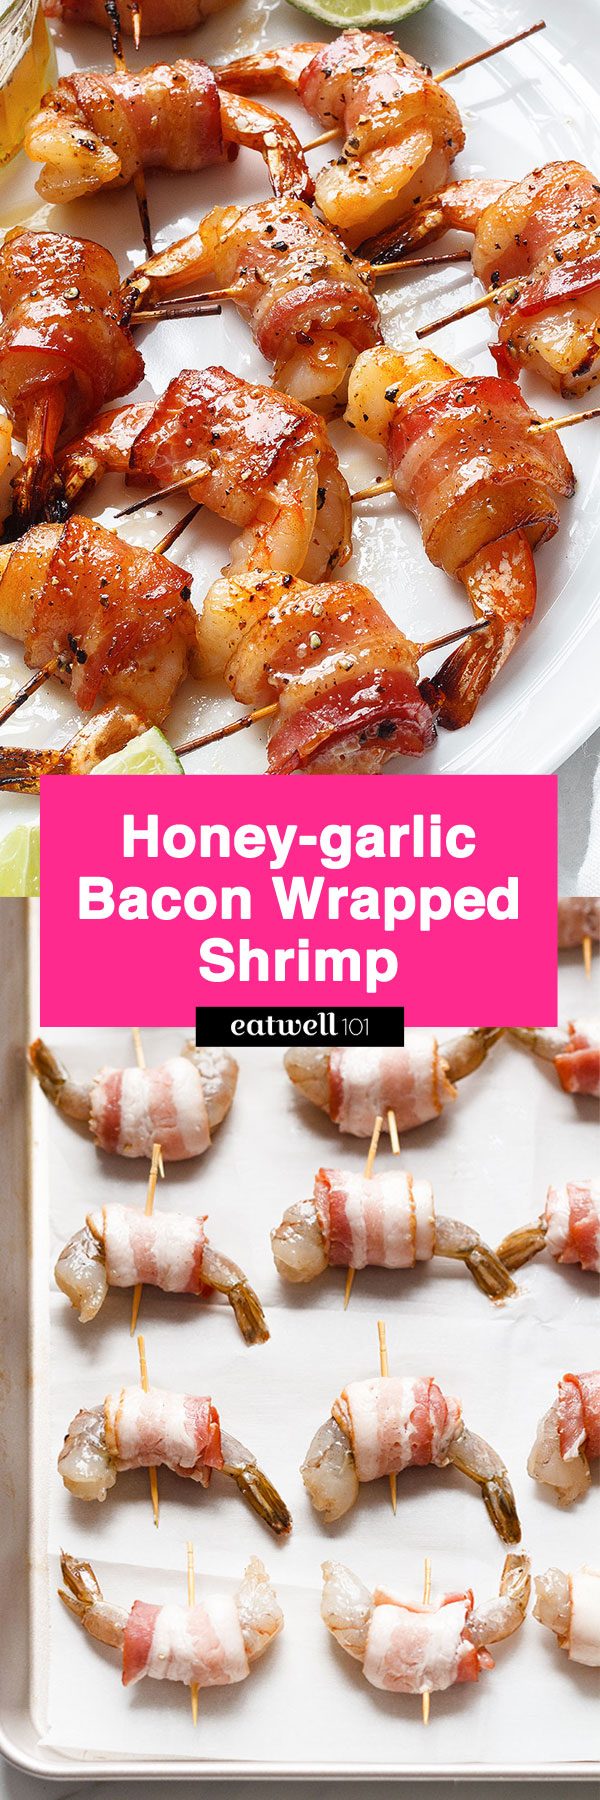 Honey-garlic Bacon Wrapped Shrimp - These crisp and sticky treats are the ultimate last-minute appetizer recipe!